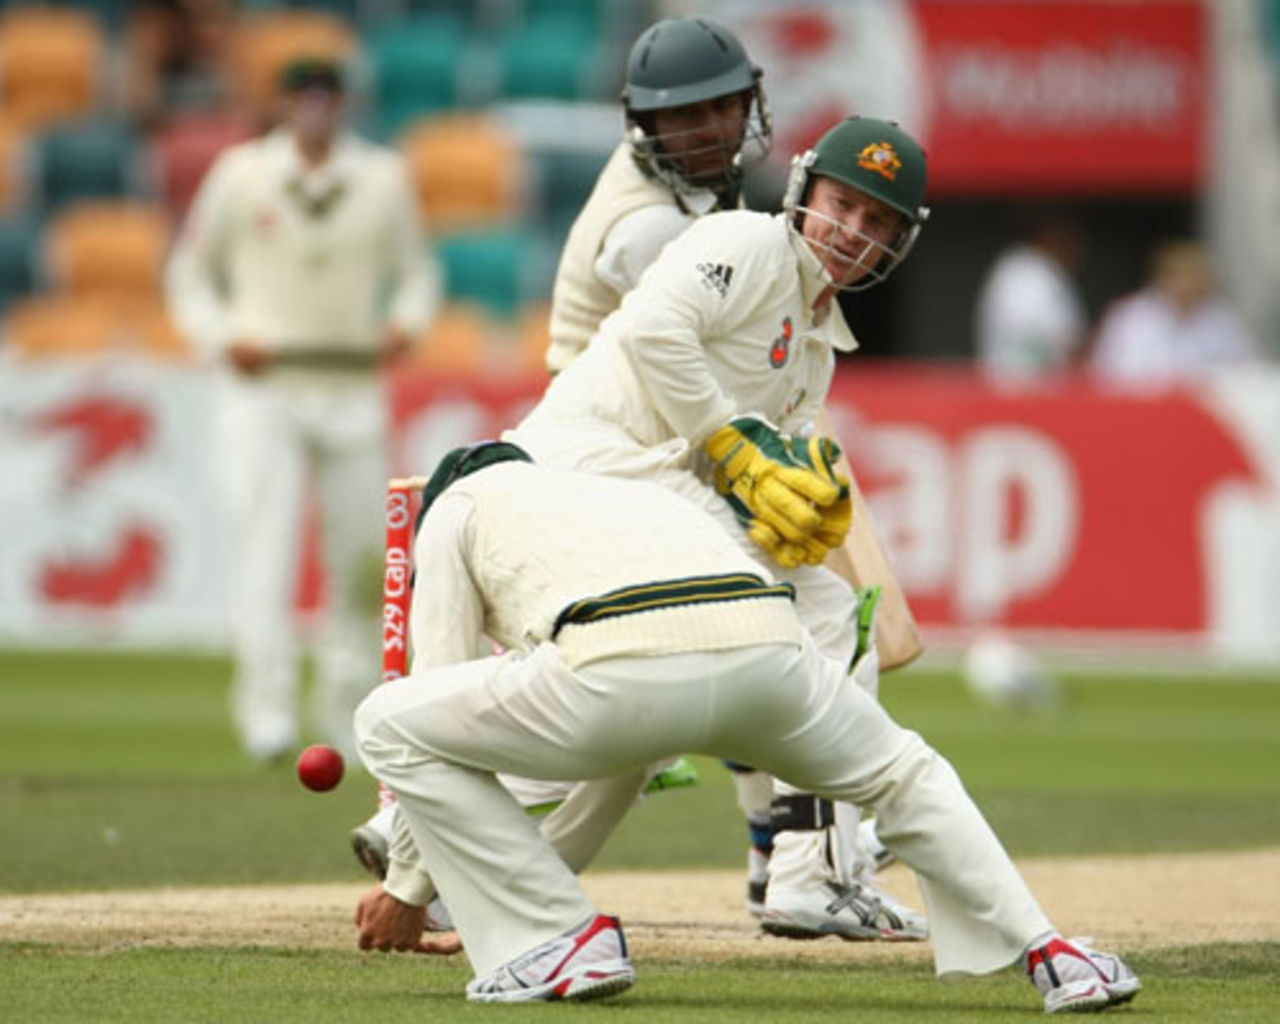 Michael Clarke's take of Sarfraz Ahmed bounced off his shoe before he grabbed control, 3rd Test, Australia v Pakistan, 5th day, Hobart, January 18, 2010